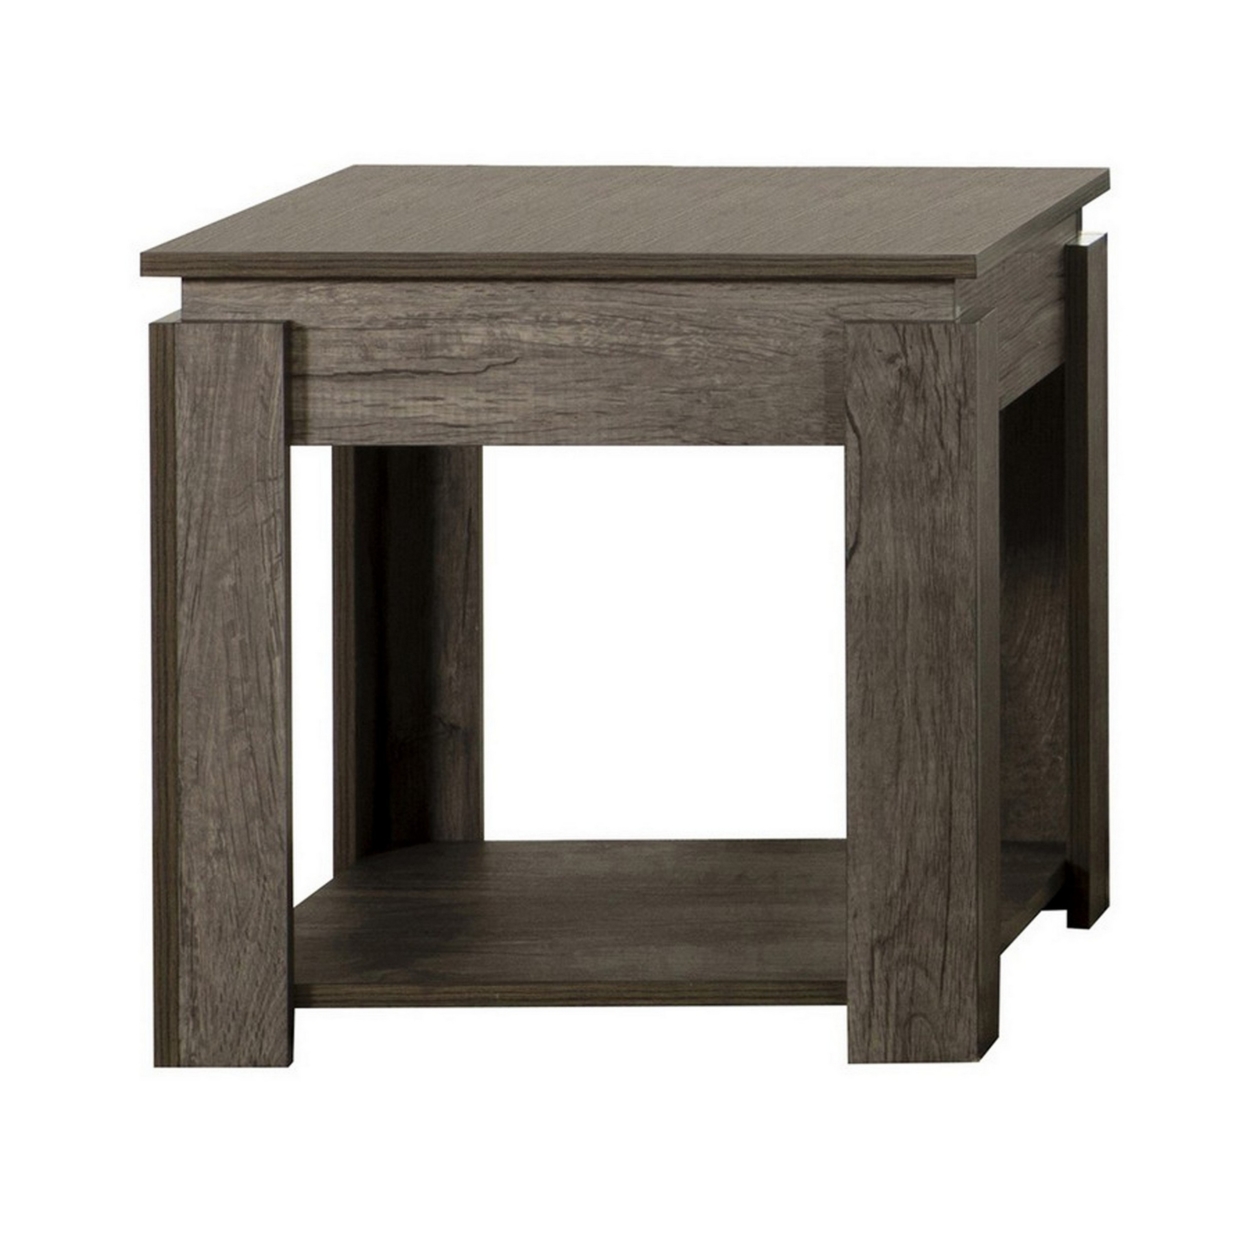 3 Piece Coffee Table And End Table Set With Raised Tops, Weathered Gray